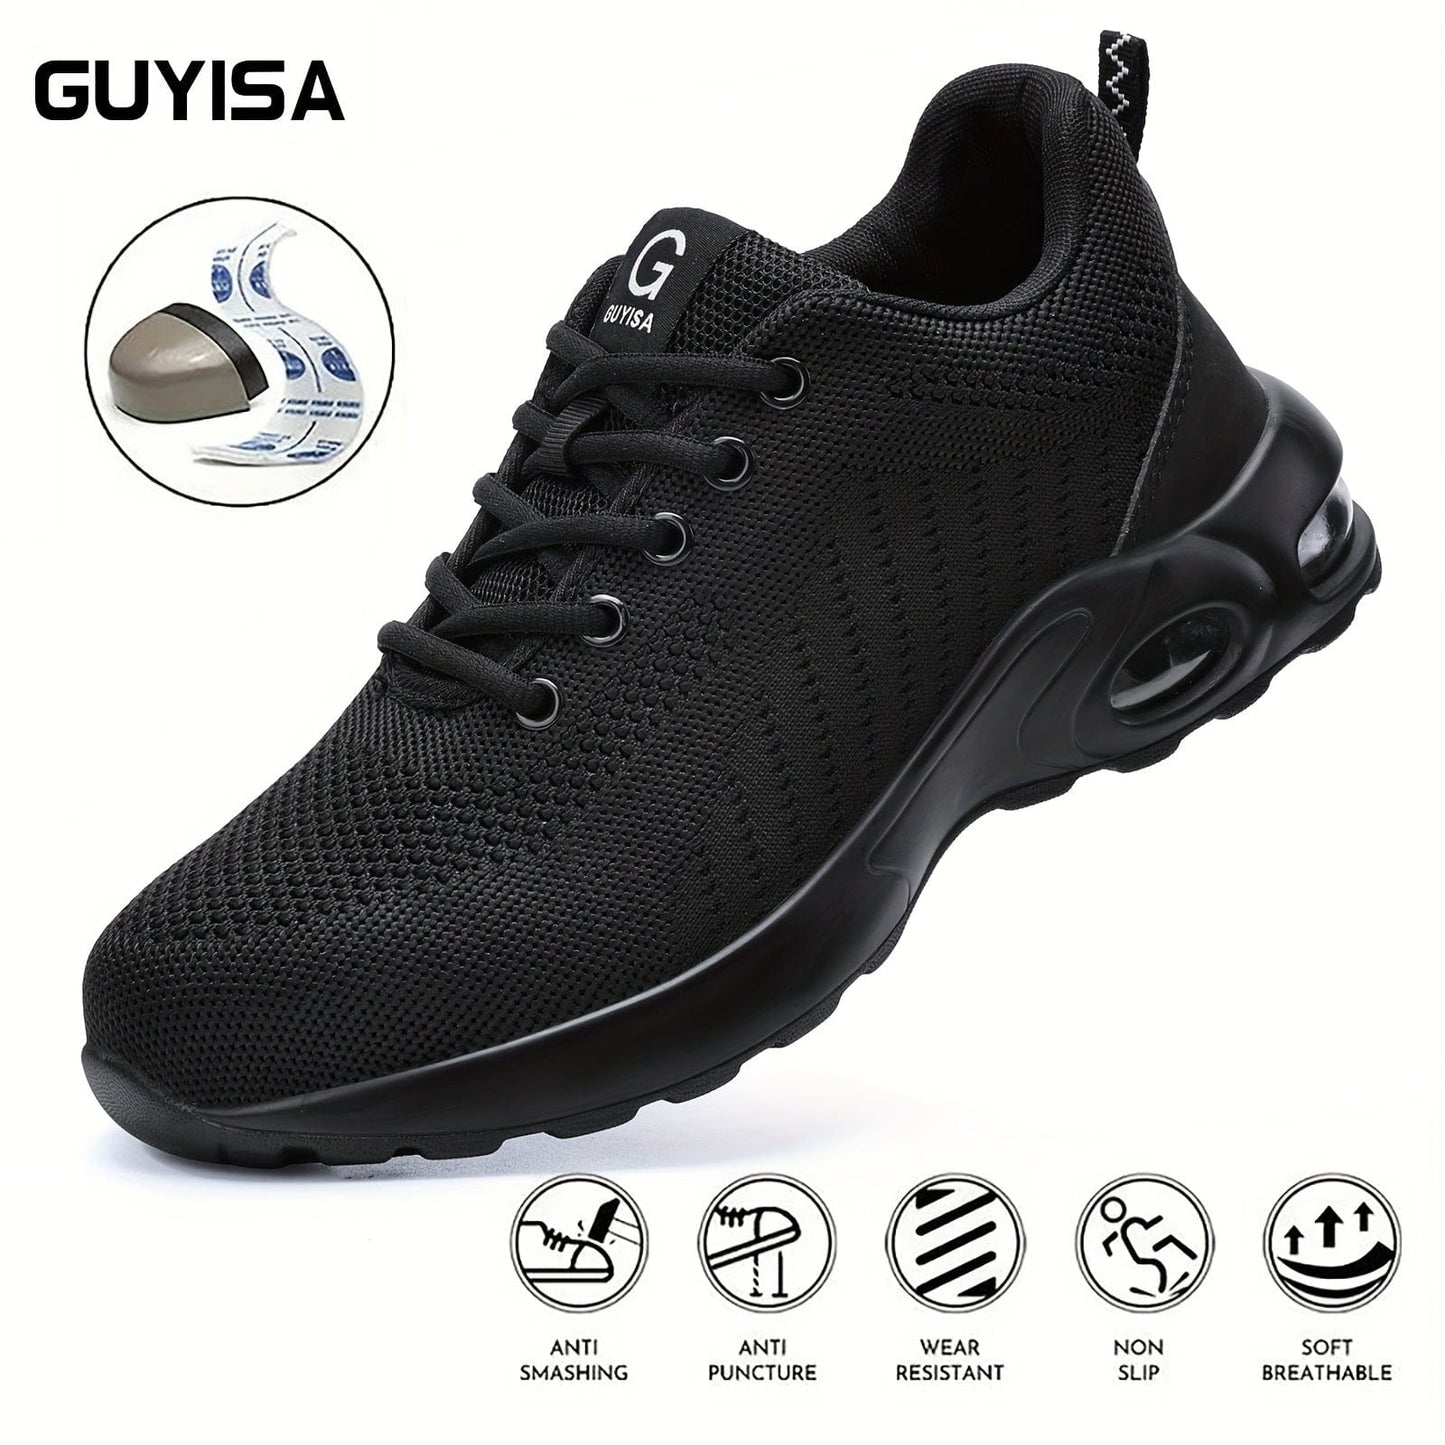 GUYISA Men's Safety Shoes, Puncture Proof Anti-skid Steel Toe Work Shoes, Breathable Air Cushion Comfortable Sneakers, Fall/Winter